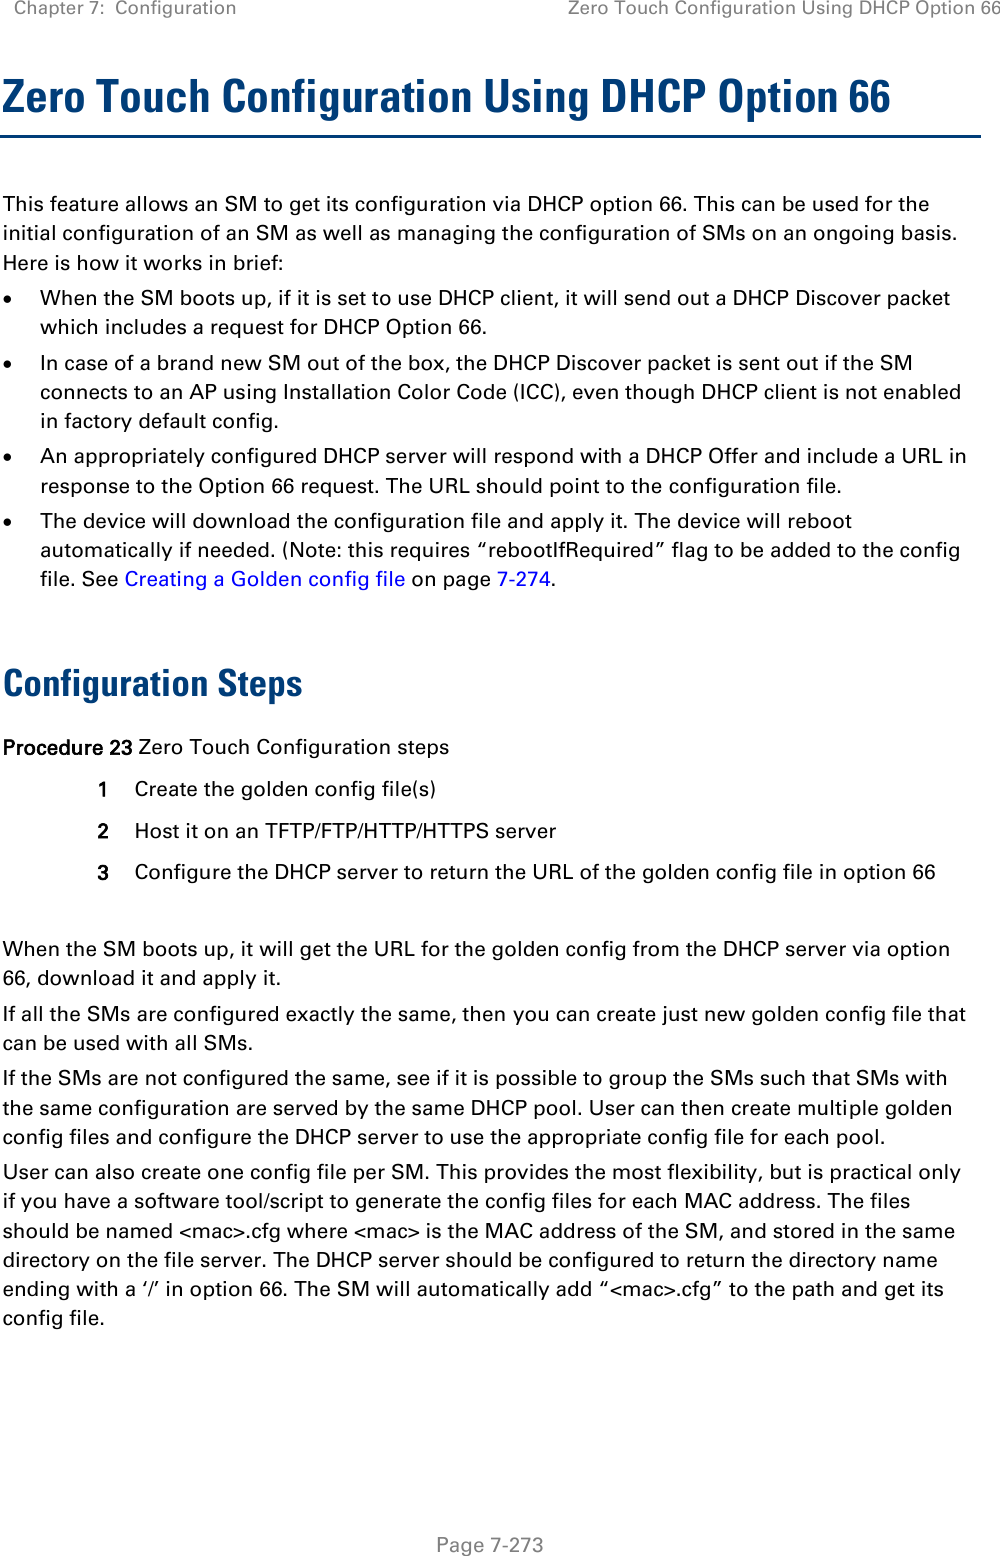 Chapter 7:  Configuration Zero Touch Configuration Using DHCP Option 66   Page 7-273 Zero Touch Configuration Using DHCP Option 66 This feature allows an SM to get its configuration via DHCP option 66. This can be used for the initial configuration of an SM as well as managing the configuration of SMs on an ongoing basis. Here is how it works in brief:  When the SM boots up, if it is set to use DHCP client, it will send out a DHCP Discover packet which includes a request for DHCP Option 66.  In case of a brand new SM out of the box, the DHCP Discover packet is sent out if the SM connects to an AP using Installation Color Code (ICC), even though DHCP client is not enabled in factory default config.   An appropriately configured DHCP server will respond with a DHCP Offer and include a URL in response to the Option 66 request. The URL should point to the configuration file.  The device will download the configuration file and apply it. The device will reboot automatically if needed. (Note: this requires “rebootIfRequired” flag to be added to the config file. See Creating a Golden config file on page 7-274.  Configuration Steps Procedure 23 Zero Touch Configuration steps 1 Create the golden config file(s) 2 Host it on an TFTP/FTP/HTTP/HTTPS server 3 Configure the DHCP server to return the URL of the golden config file in option 66  When the SM boots up, it will get the URL for the golden config from the DHCP server via option 66, download it and apply it. If all the SMs are configured exactly the same, then you can create just new golden config file that can be used with all SMs.  If the SMs are not configured the same, see if it is possible to group the SMs such that SMs with the same configuration are served by the same DHCP pool. User can then create multiple golden config files and configure the DHCP server to use the appropriate config file for each pool. User can also create one config file per SM. This provides the most flexibility, but is practical only if you have a software tool/script to generate the config files for each MAC address. The files should be named &lt;mac&gt;.cfg where &lt;mac&gt; is the MAC address of the SM, and stored in the same directory on the file server. The DHCP server should be configured to return the directory name ending with a ‘/’ in option 66. The SM will automatically add “&lt;mac&gt;.cfg” to the path and get its config file. 